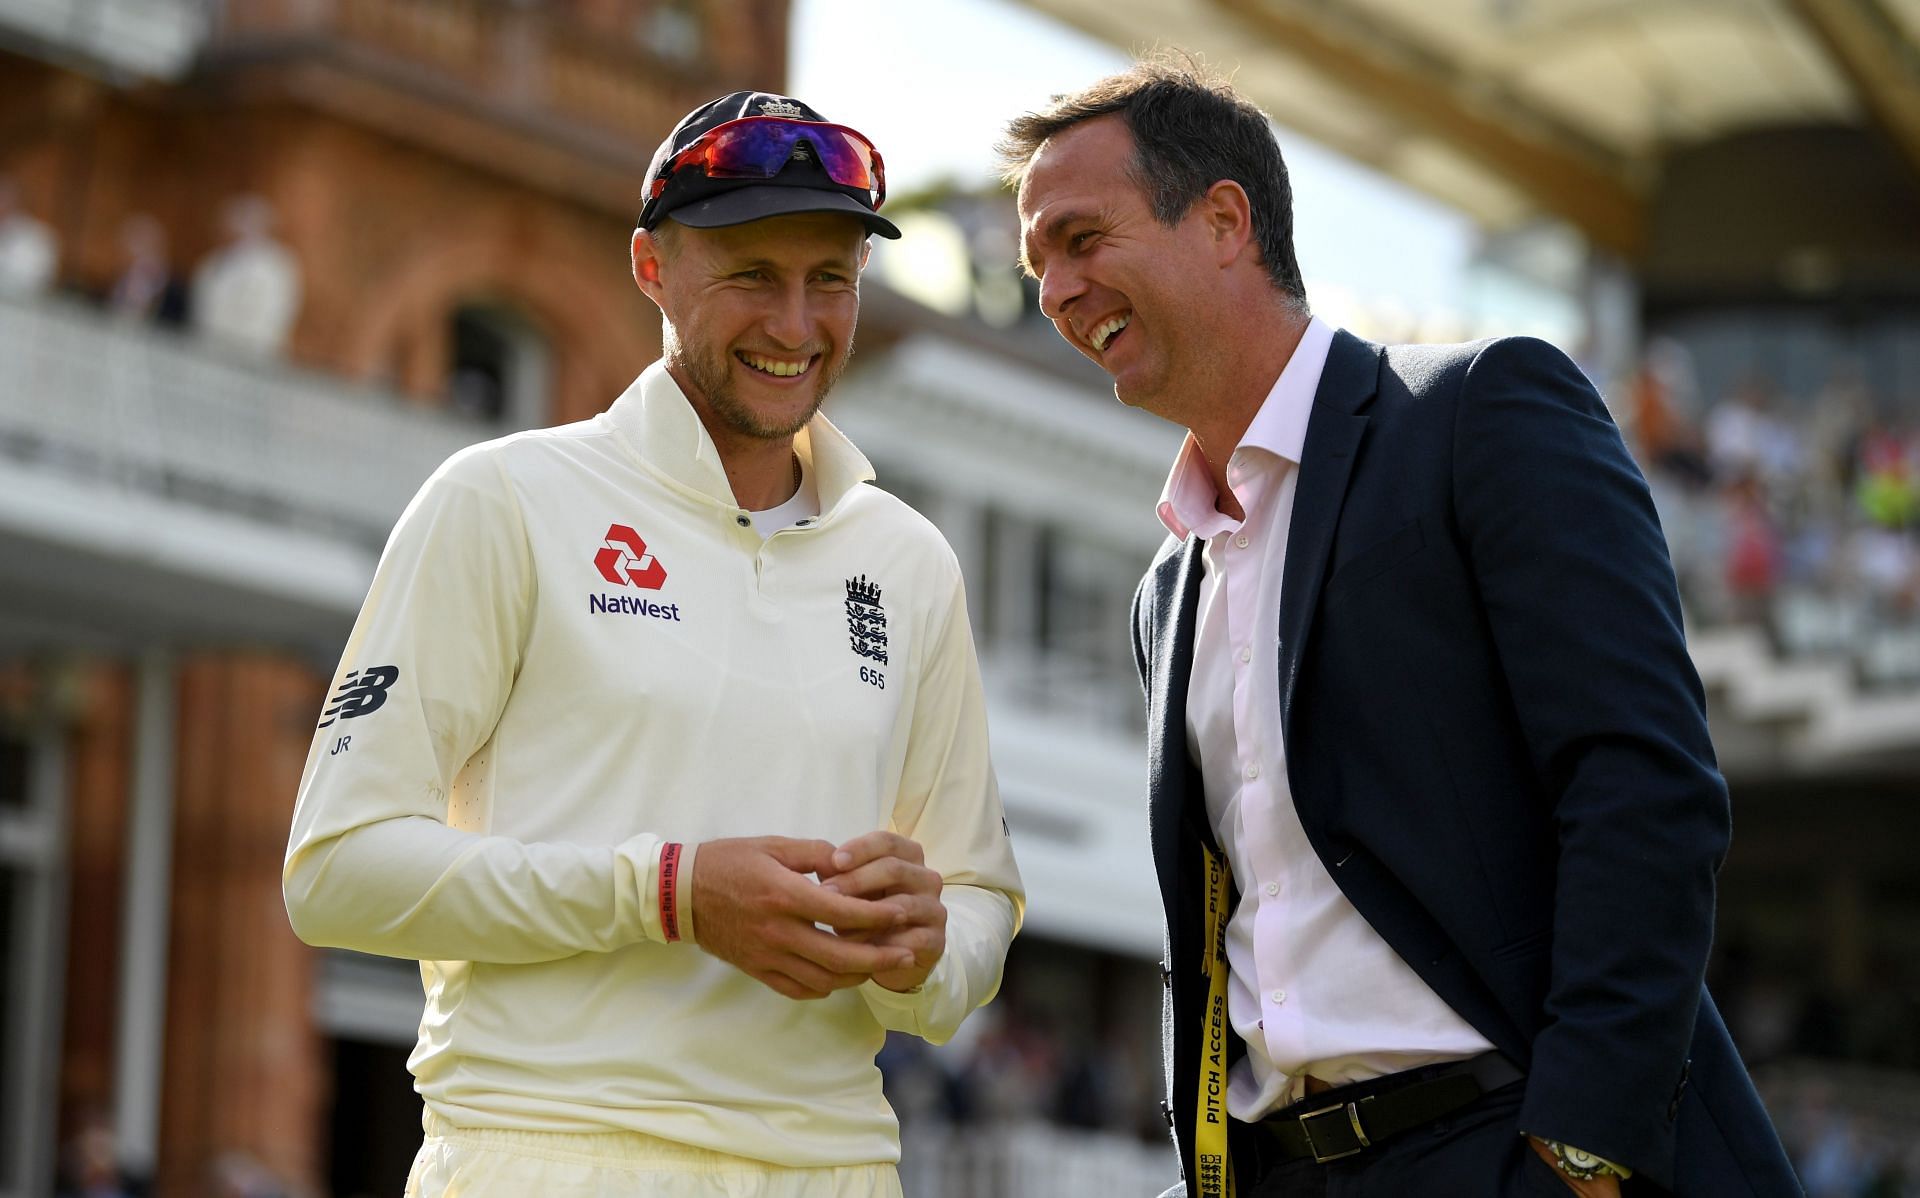 Joe Root (right) speaks with Michael Vaughan. (Pic: Getty Images)